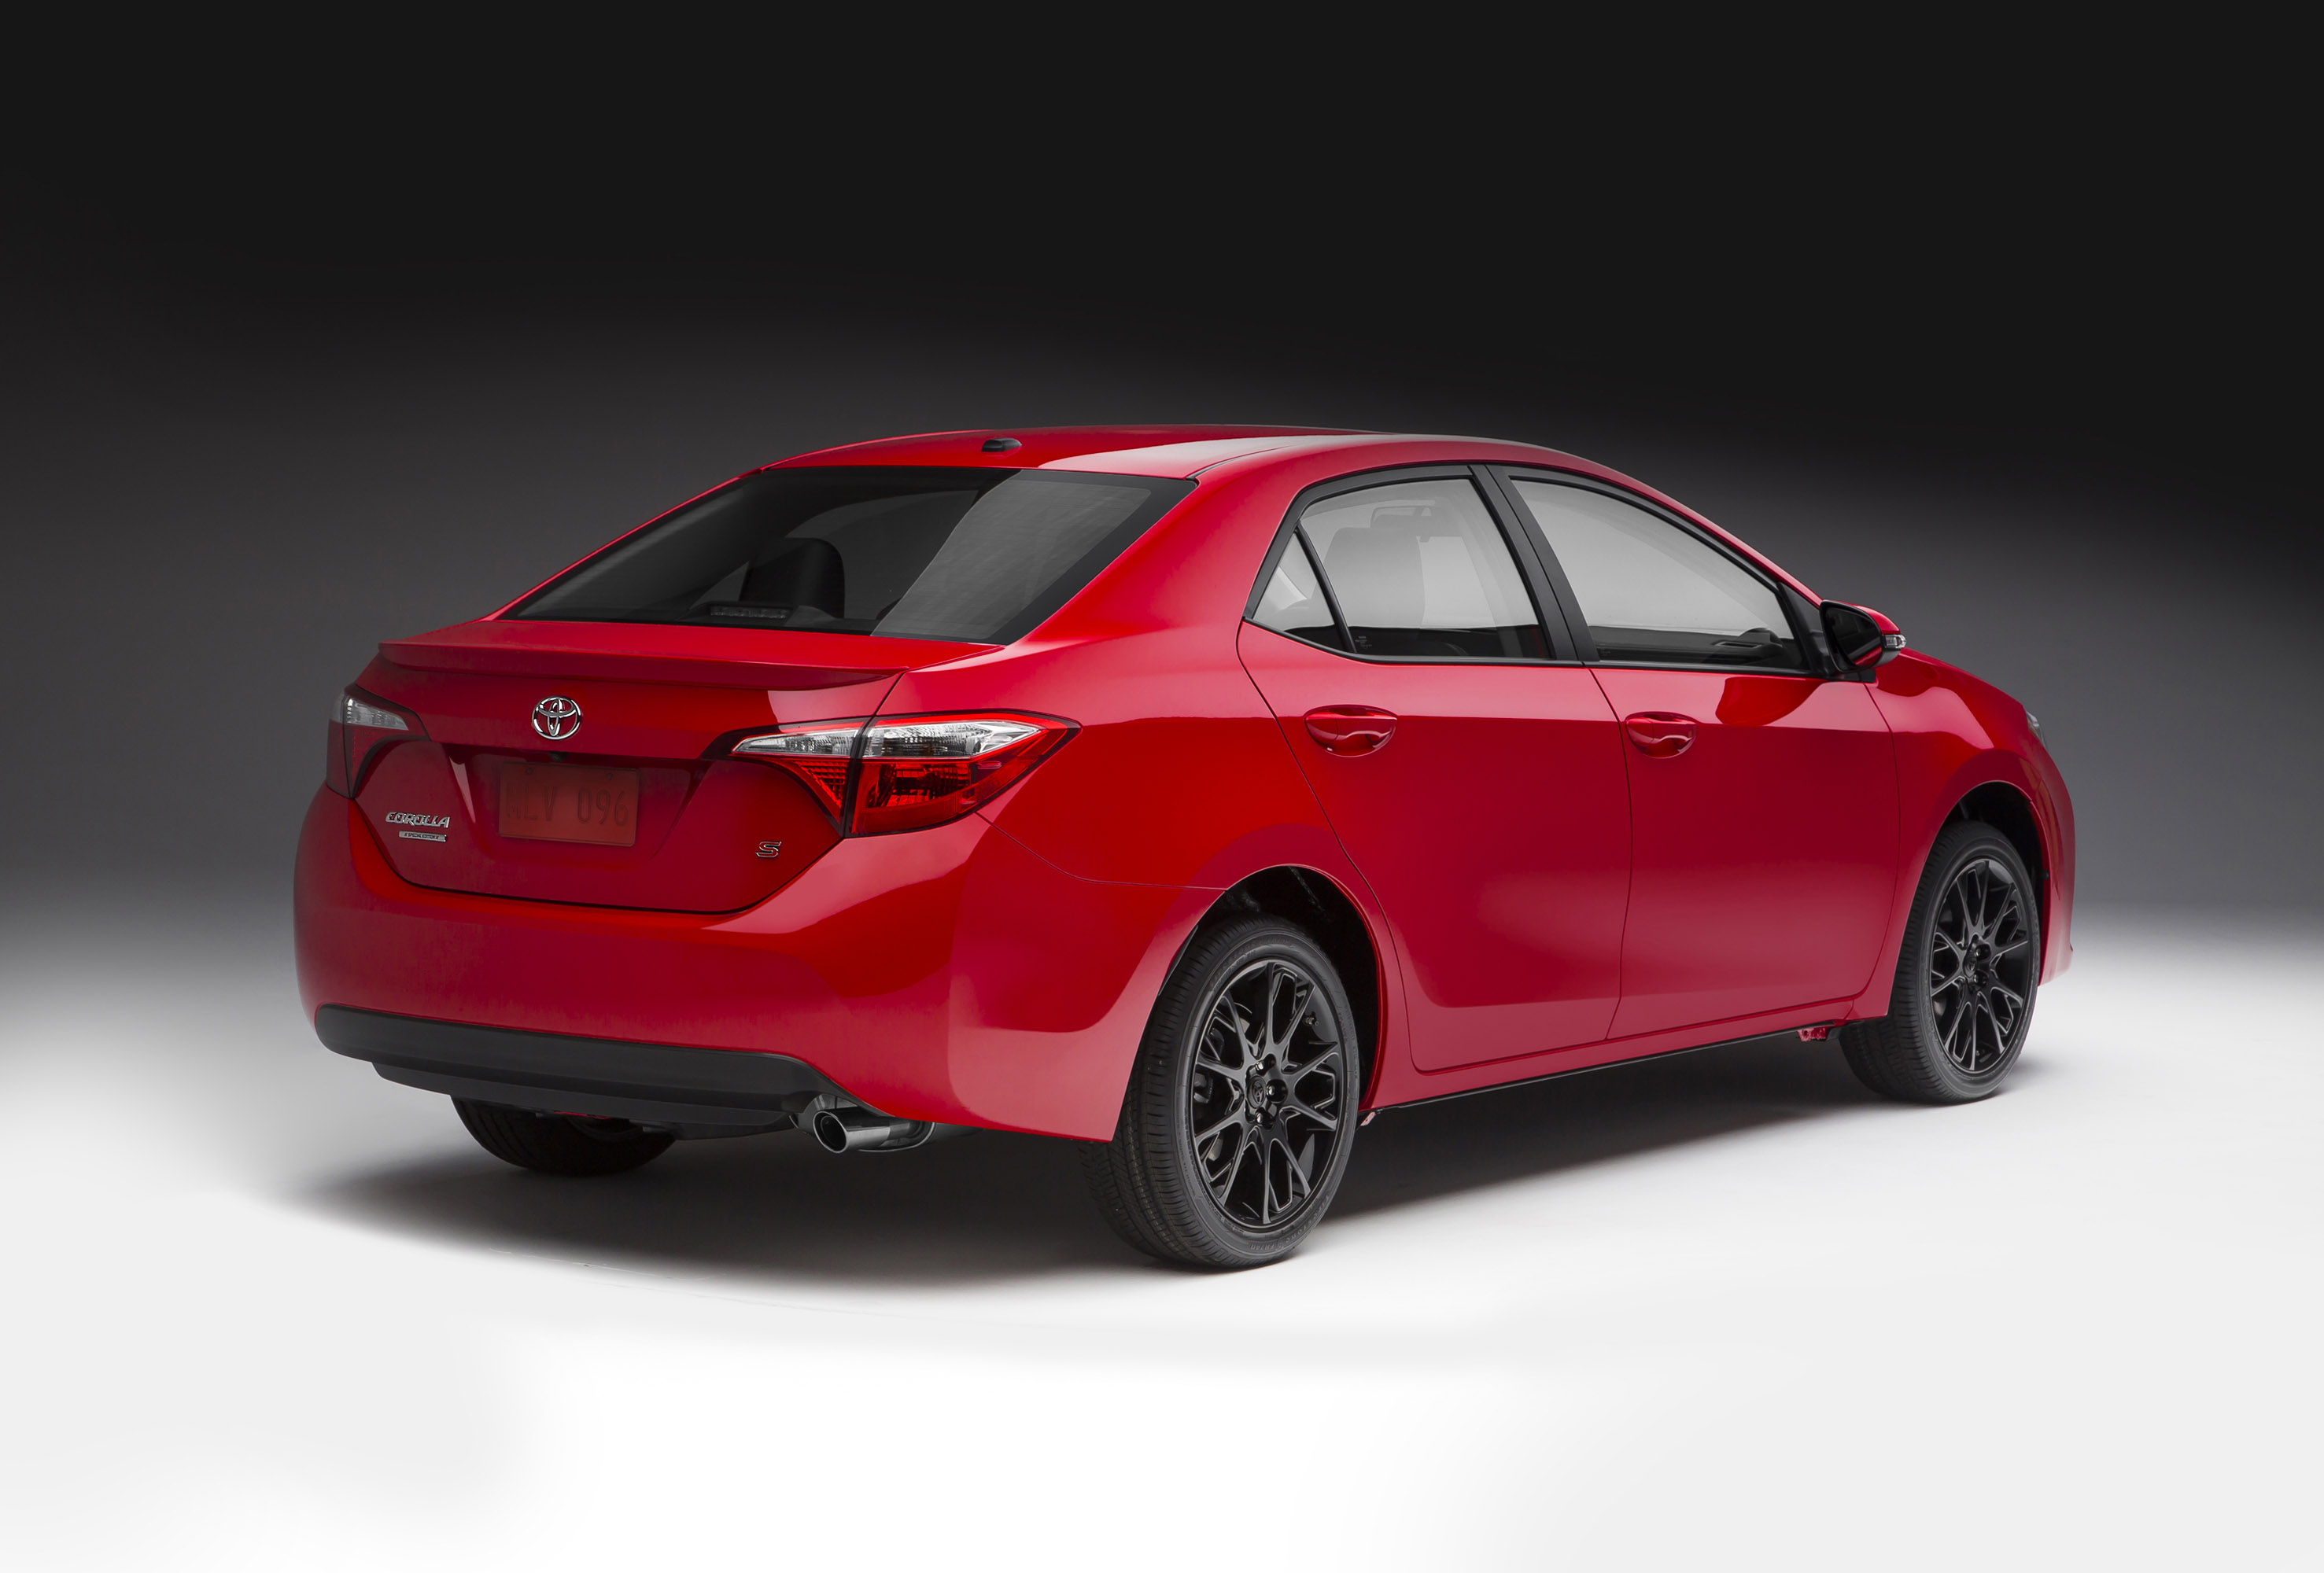 2016 Toyota Corolla Special Edition - HD Pictures @ carsinvasion.com